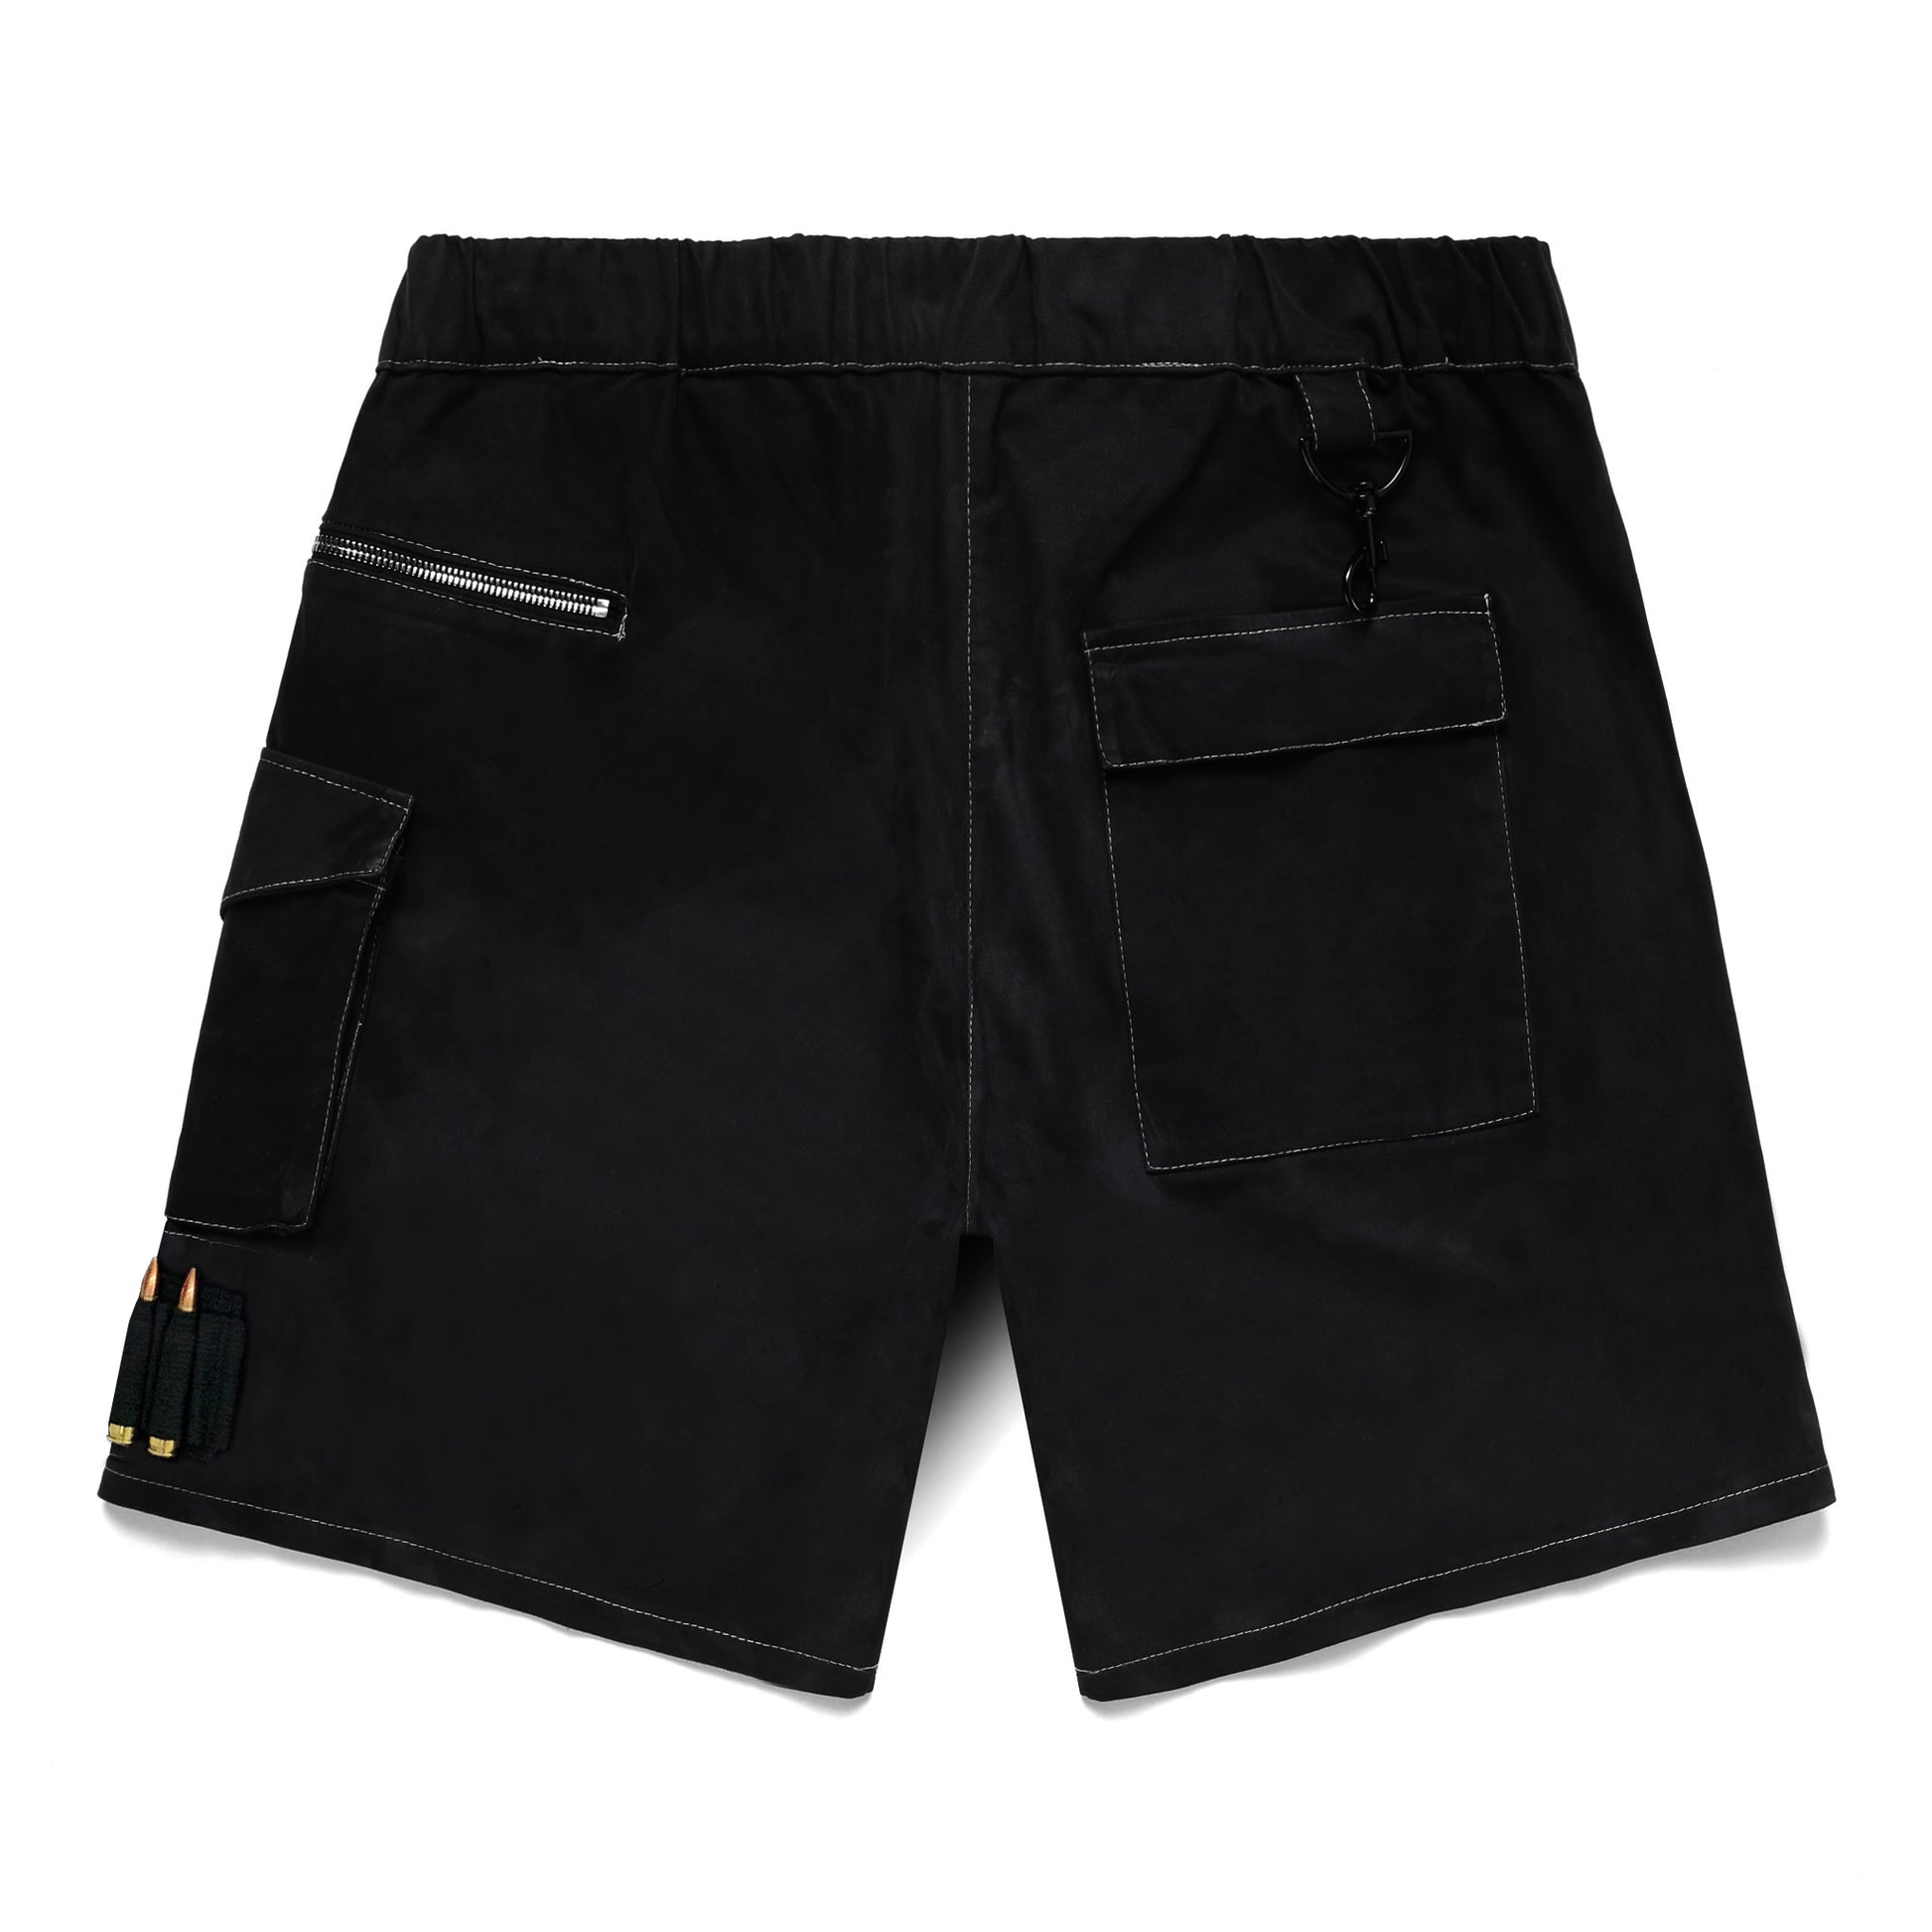 TACTICAL SHORTS by MENACE